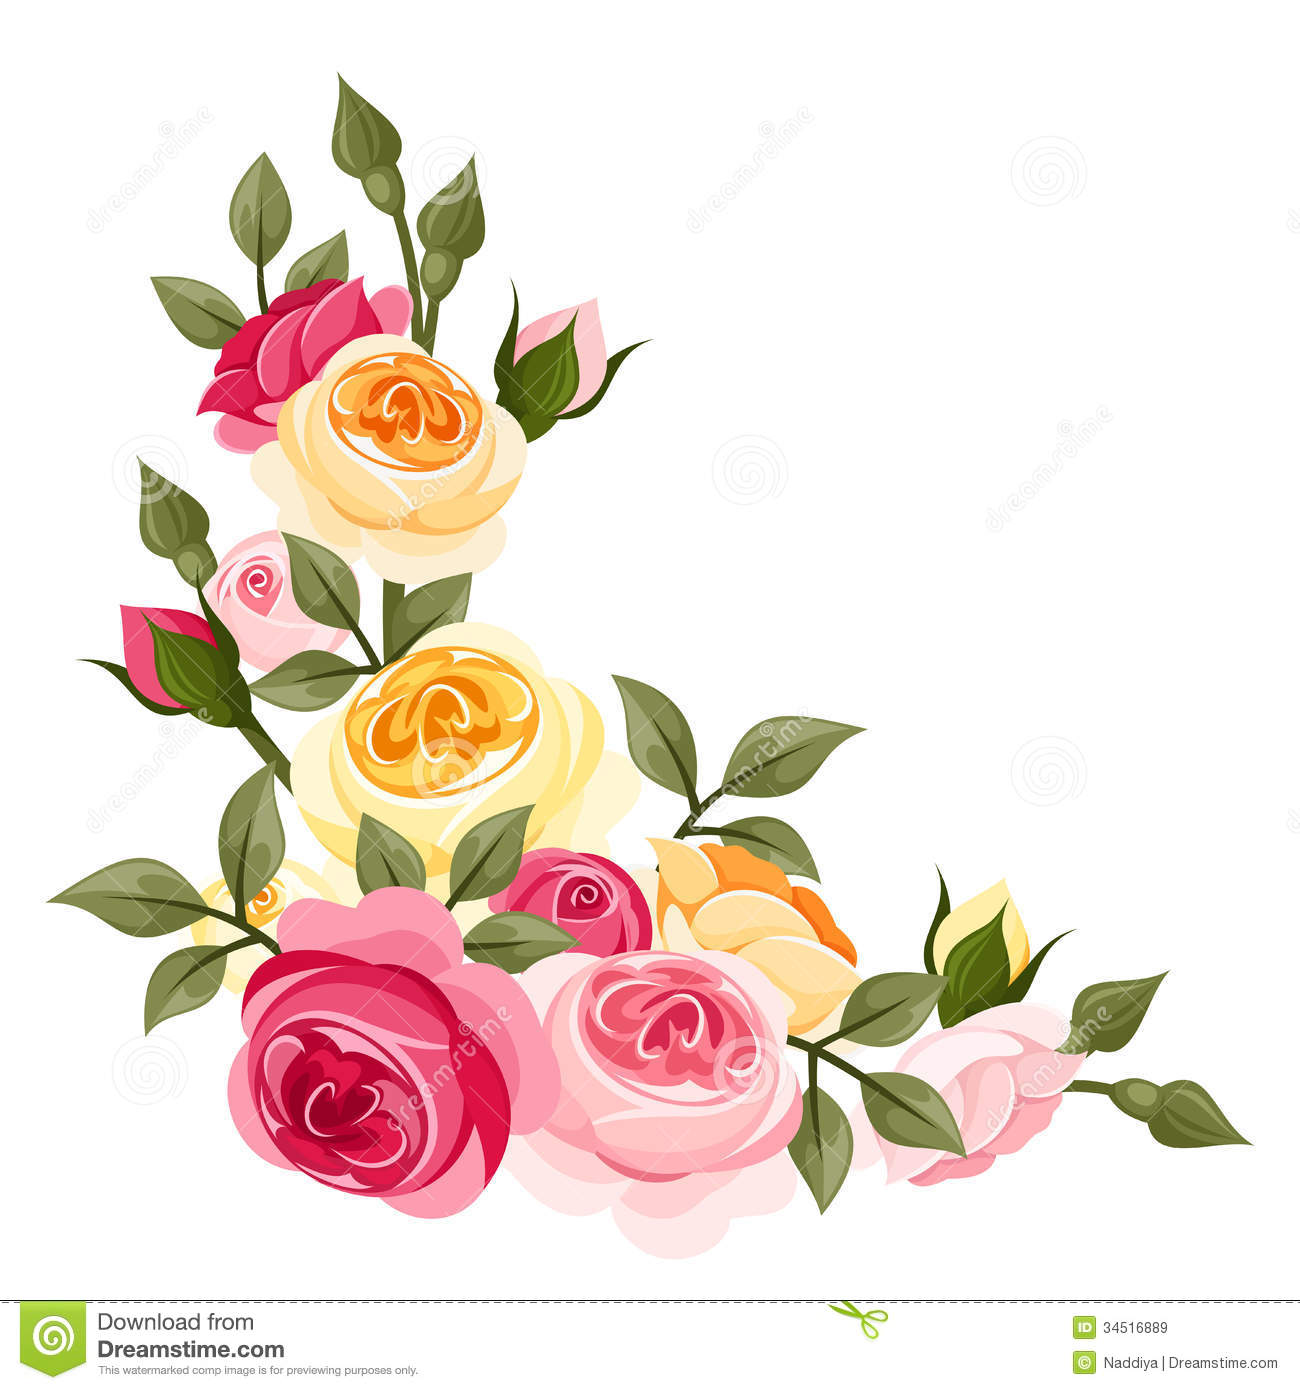 Pink And Yellow Vintage Roses  Royalty Free Stock Images   Image